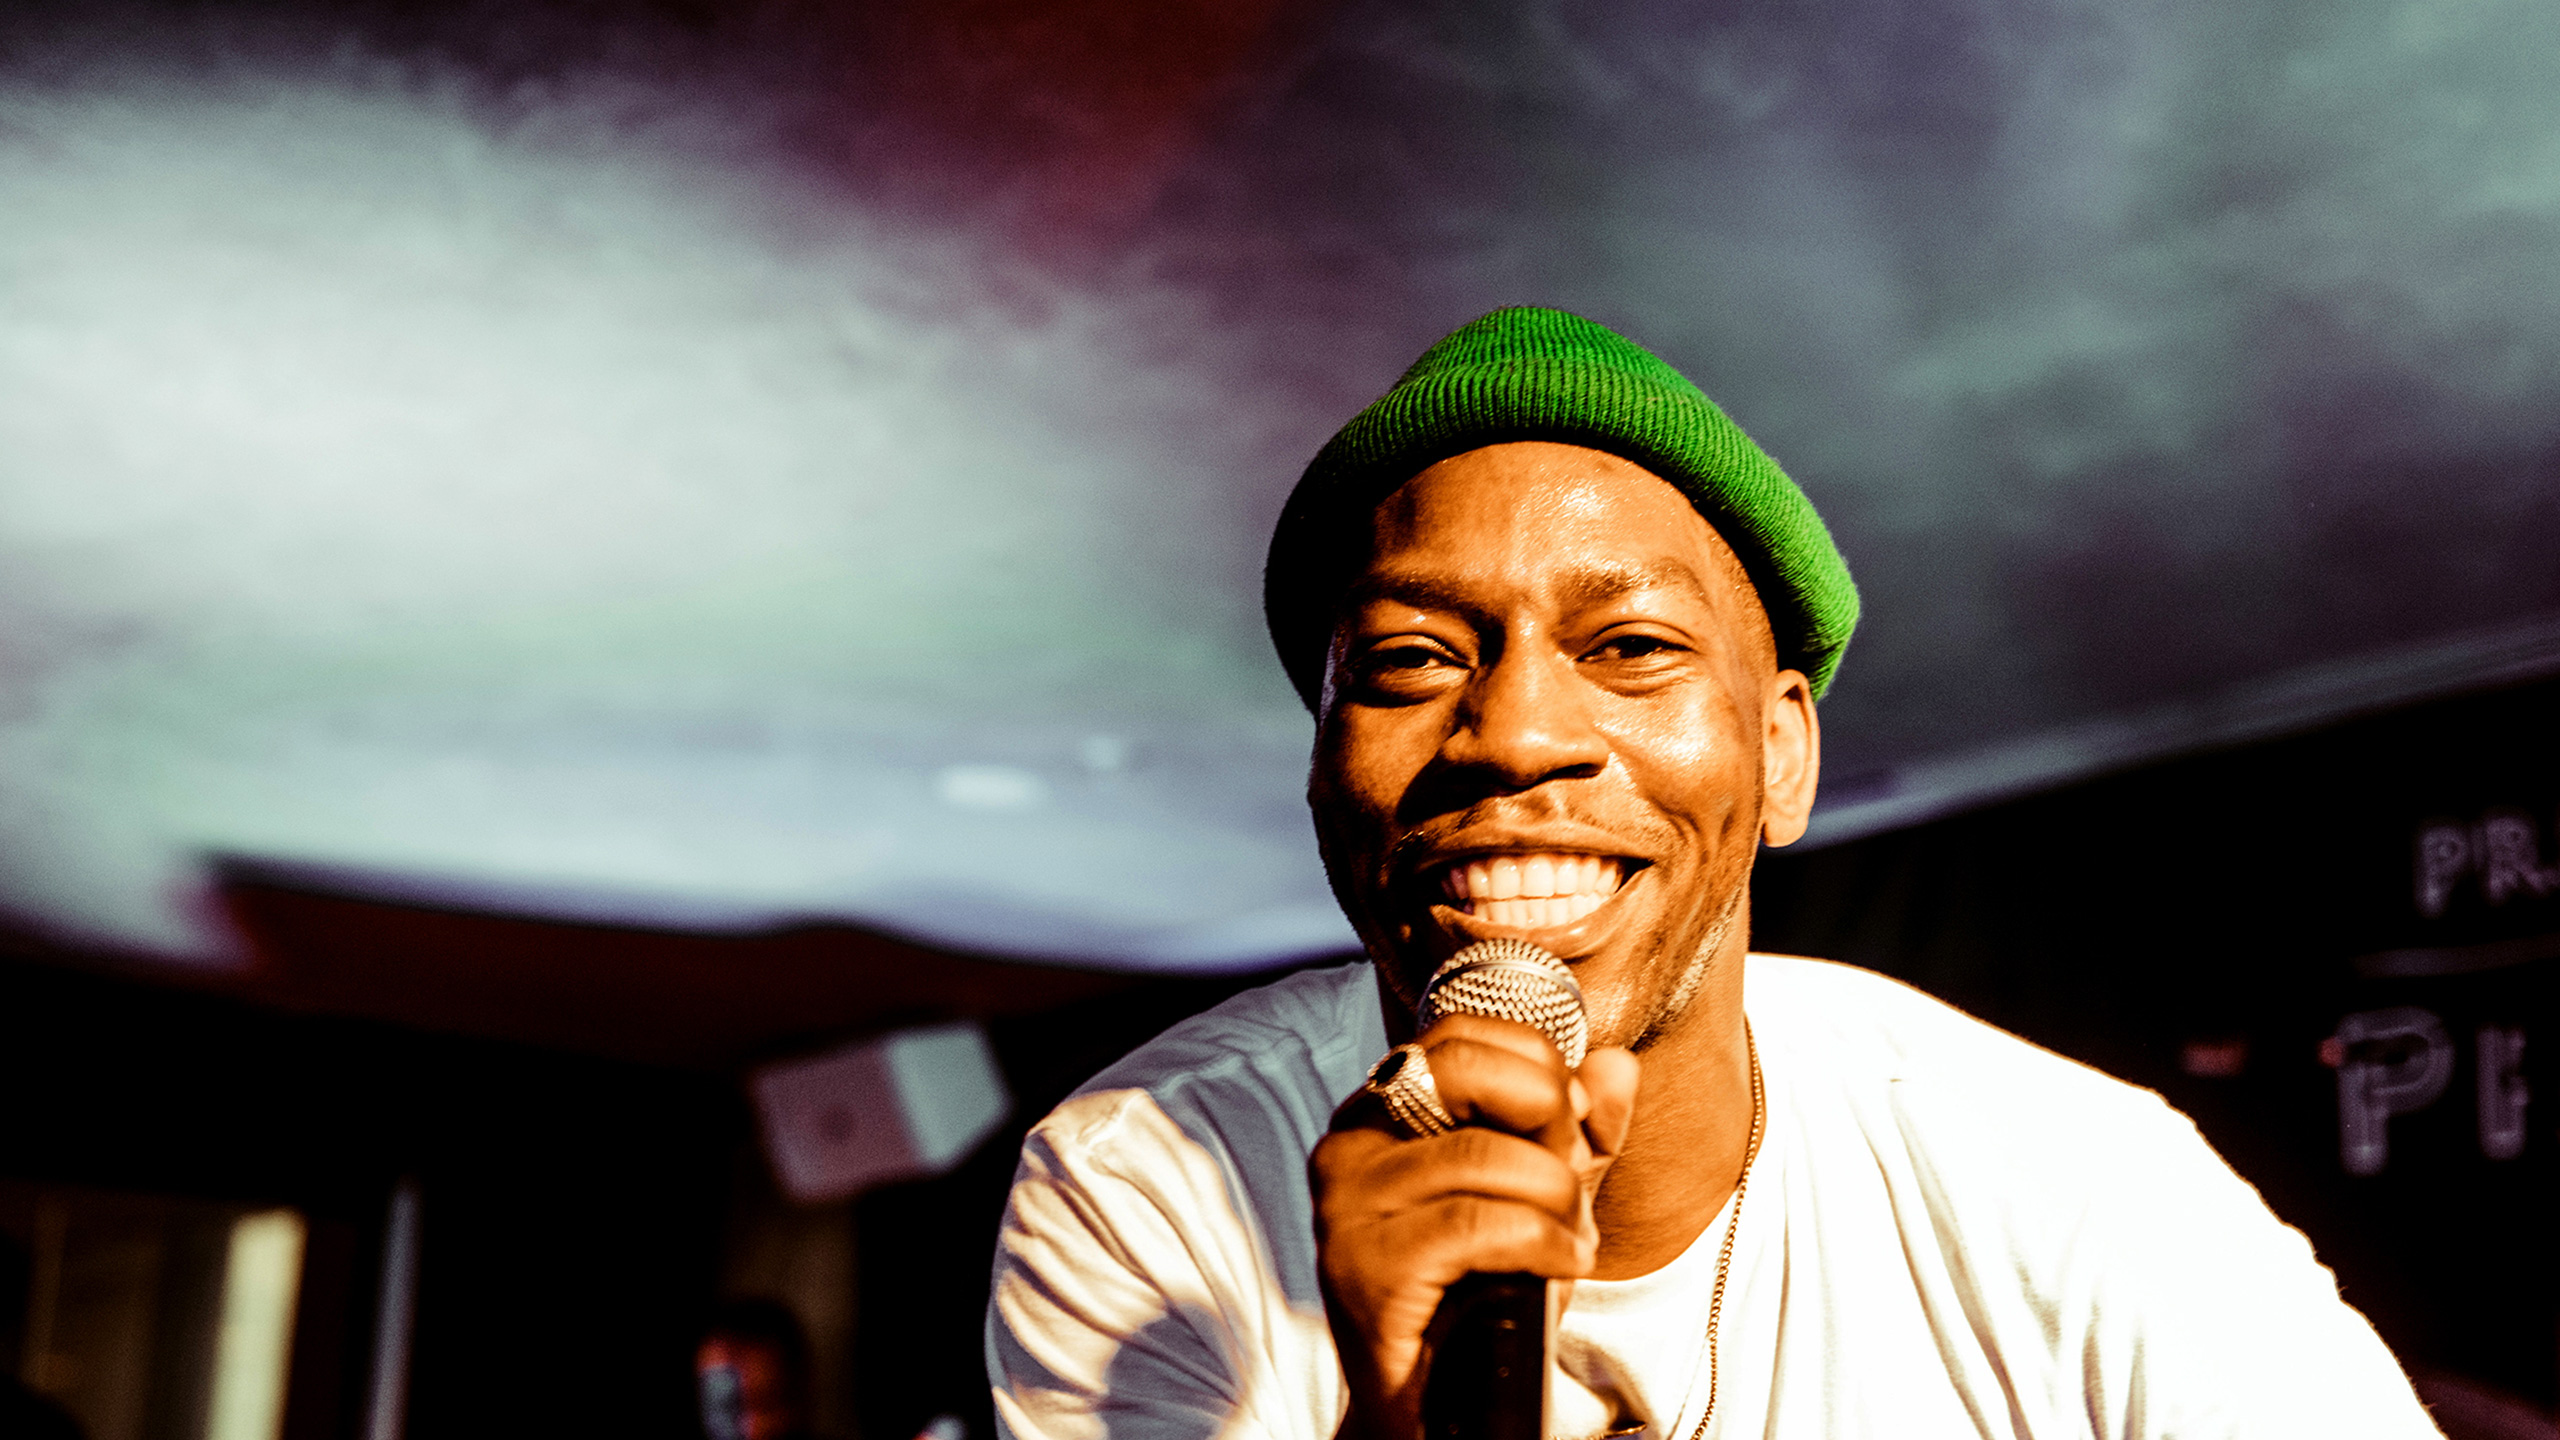 Tiggs Da Author performing and smiling at the camera